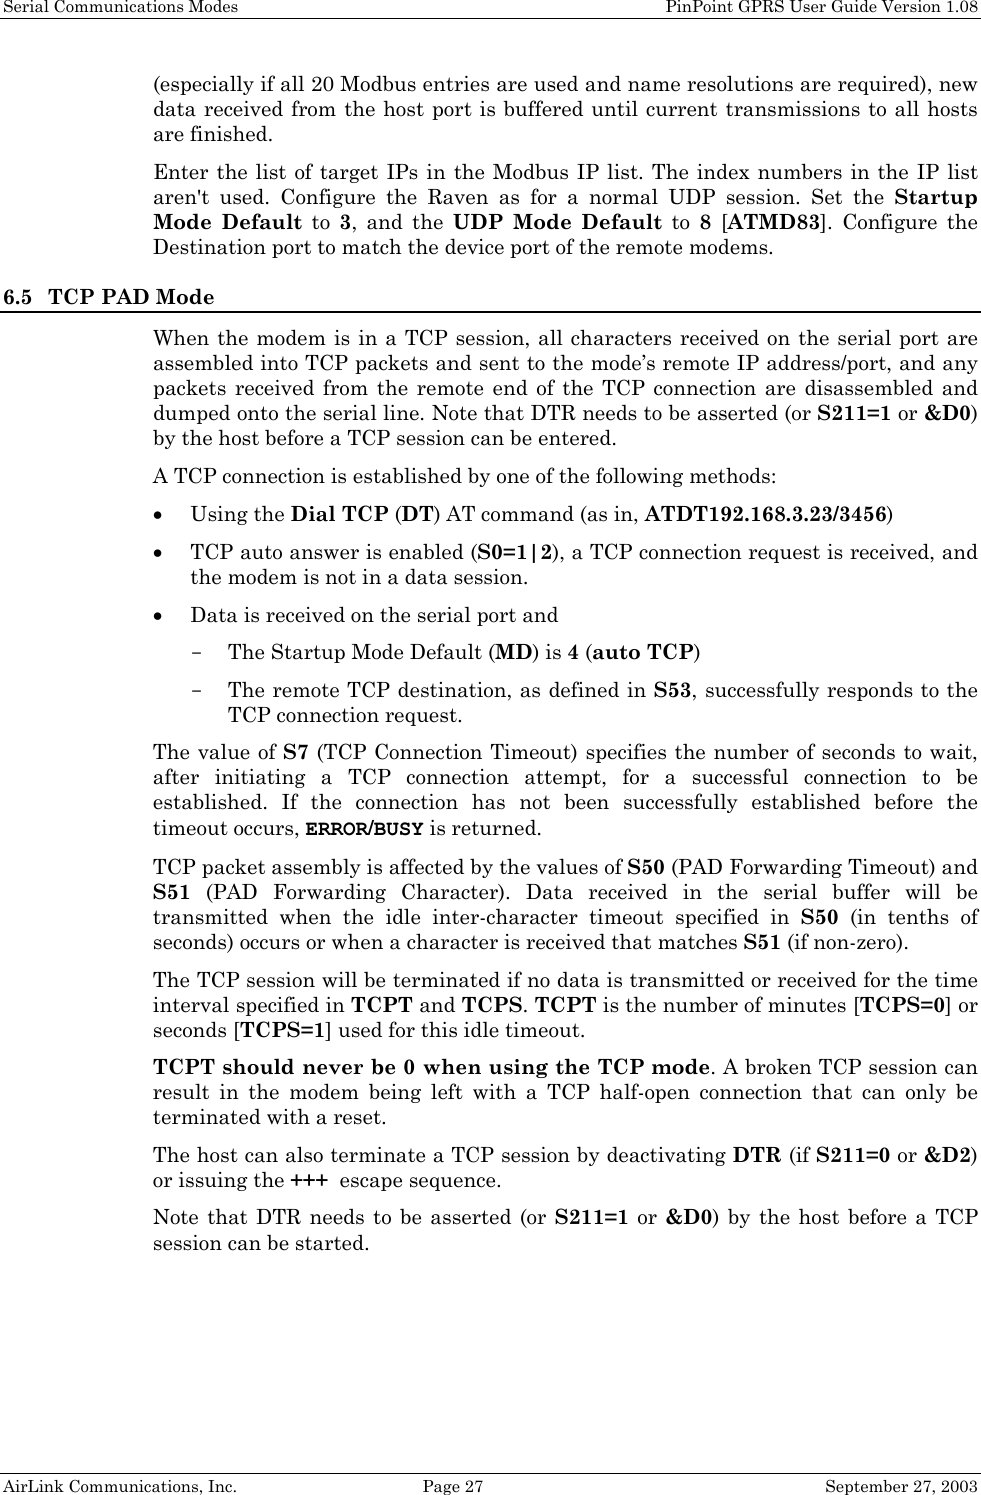 Serial Communications Modes    PinPoint GPRS User Guide Version 1.08 AirLink Communications, Inc.  Page 27  September 27, 2003 (especially if all 20 Modbus entries are used and name resolutions are required), new data received from the host port is buffered until current transmissions to all hosts are finished. Enter the list of target IPs in the Modbus IP list. The index numbers in the IP list aren&apos;t used. Configure the Raven as for a normal UDP session. Set the Startup Mode Default to 3, and the UDP Mode Default to 8 [ATMD83]. Configure the Destination port to match the device port of the remote modems. 6.5 TCP PAD Mode When the modem is in a TCP session, all characters received on the serial port are assembled into TCP packets and sent to the mode’s remote IP address/port, and any packets received from the remote end of the TCP connection are disassembled and dumped onto the serial line. Note that DTR needs to be asserted (or S211=1 or &amp;D0) by the host before a TCP session can be entered. A TCP connection is established by one of the following methods: • Using the Dial TCP (DT) AT command (as in, ATDT192.168.3.23/3456) • TCP auto answer is enabled (S0=1|2), a TCP connection request is received, and the modem is not in a data session. • Data is received on the serial port and  - The Startup Mode Default (MD) is 4 (auto TCP) - The remote TCP destination, as defined in S53, successfully responds to the TCP connection request.  The value of S7 (TCP Connection Timeout) specifies the number of seconds to wait, after initiating a TCP connection attempt, for a successful connection to be established. If the connection has not been successfully established before the timeout occurs, ERROR/BUSY is returned.  TCP packet assembly is affected by the values of S50 (PAD Forwarding Timeout) and S51 (PAD Forwarding Character). Data received in the serial buffer will be transmitted when the idle inter-character timeout specified in S50 (in tenths of seconds) occurs or when a character is received that matches S51 (if non-zero). The TCP session will be terminated if no data is transmitted or received for the time interval specified in TCPT and TCPS. TCPT is the number of minutes [TCPS=0] or seconds [TCPS=1] used for this idle timeout.  TCPT should never be 0 when using the TCP mode. A broken TCP session can result in the modem being left with a TCP half-open connection that can only be terminated with a reset. The host can also terminate a TCP session by deactivating DTR (if S211=0 or &amp;D2) or issuing the +++  escape sequence. Note that DTR needs to be asserted (or S211=1 or &amp;D0) by the host before a TCP session can be started.  